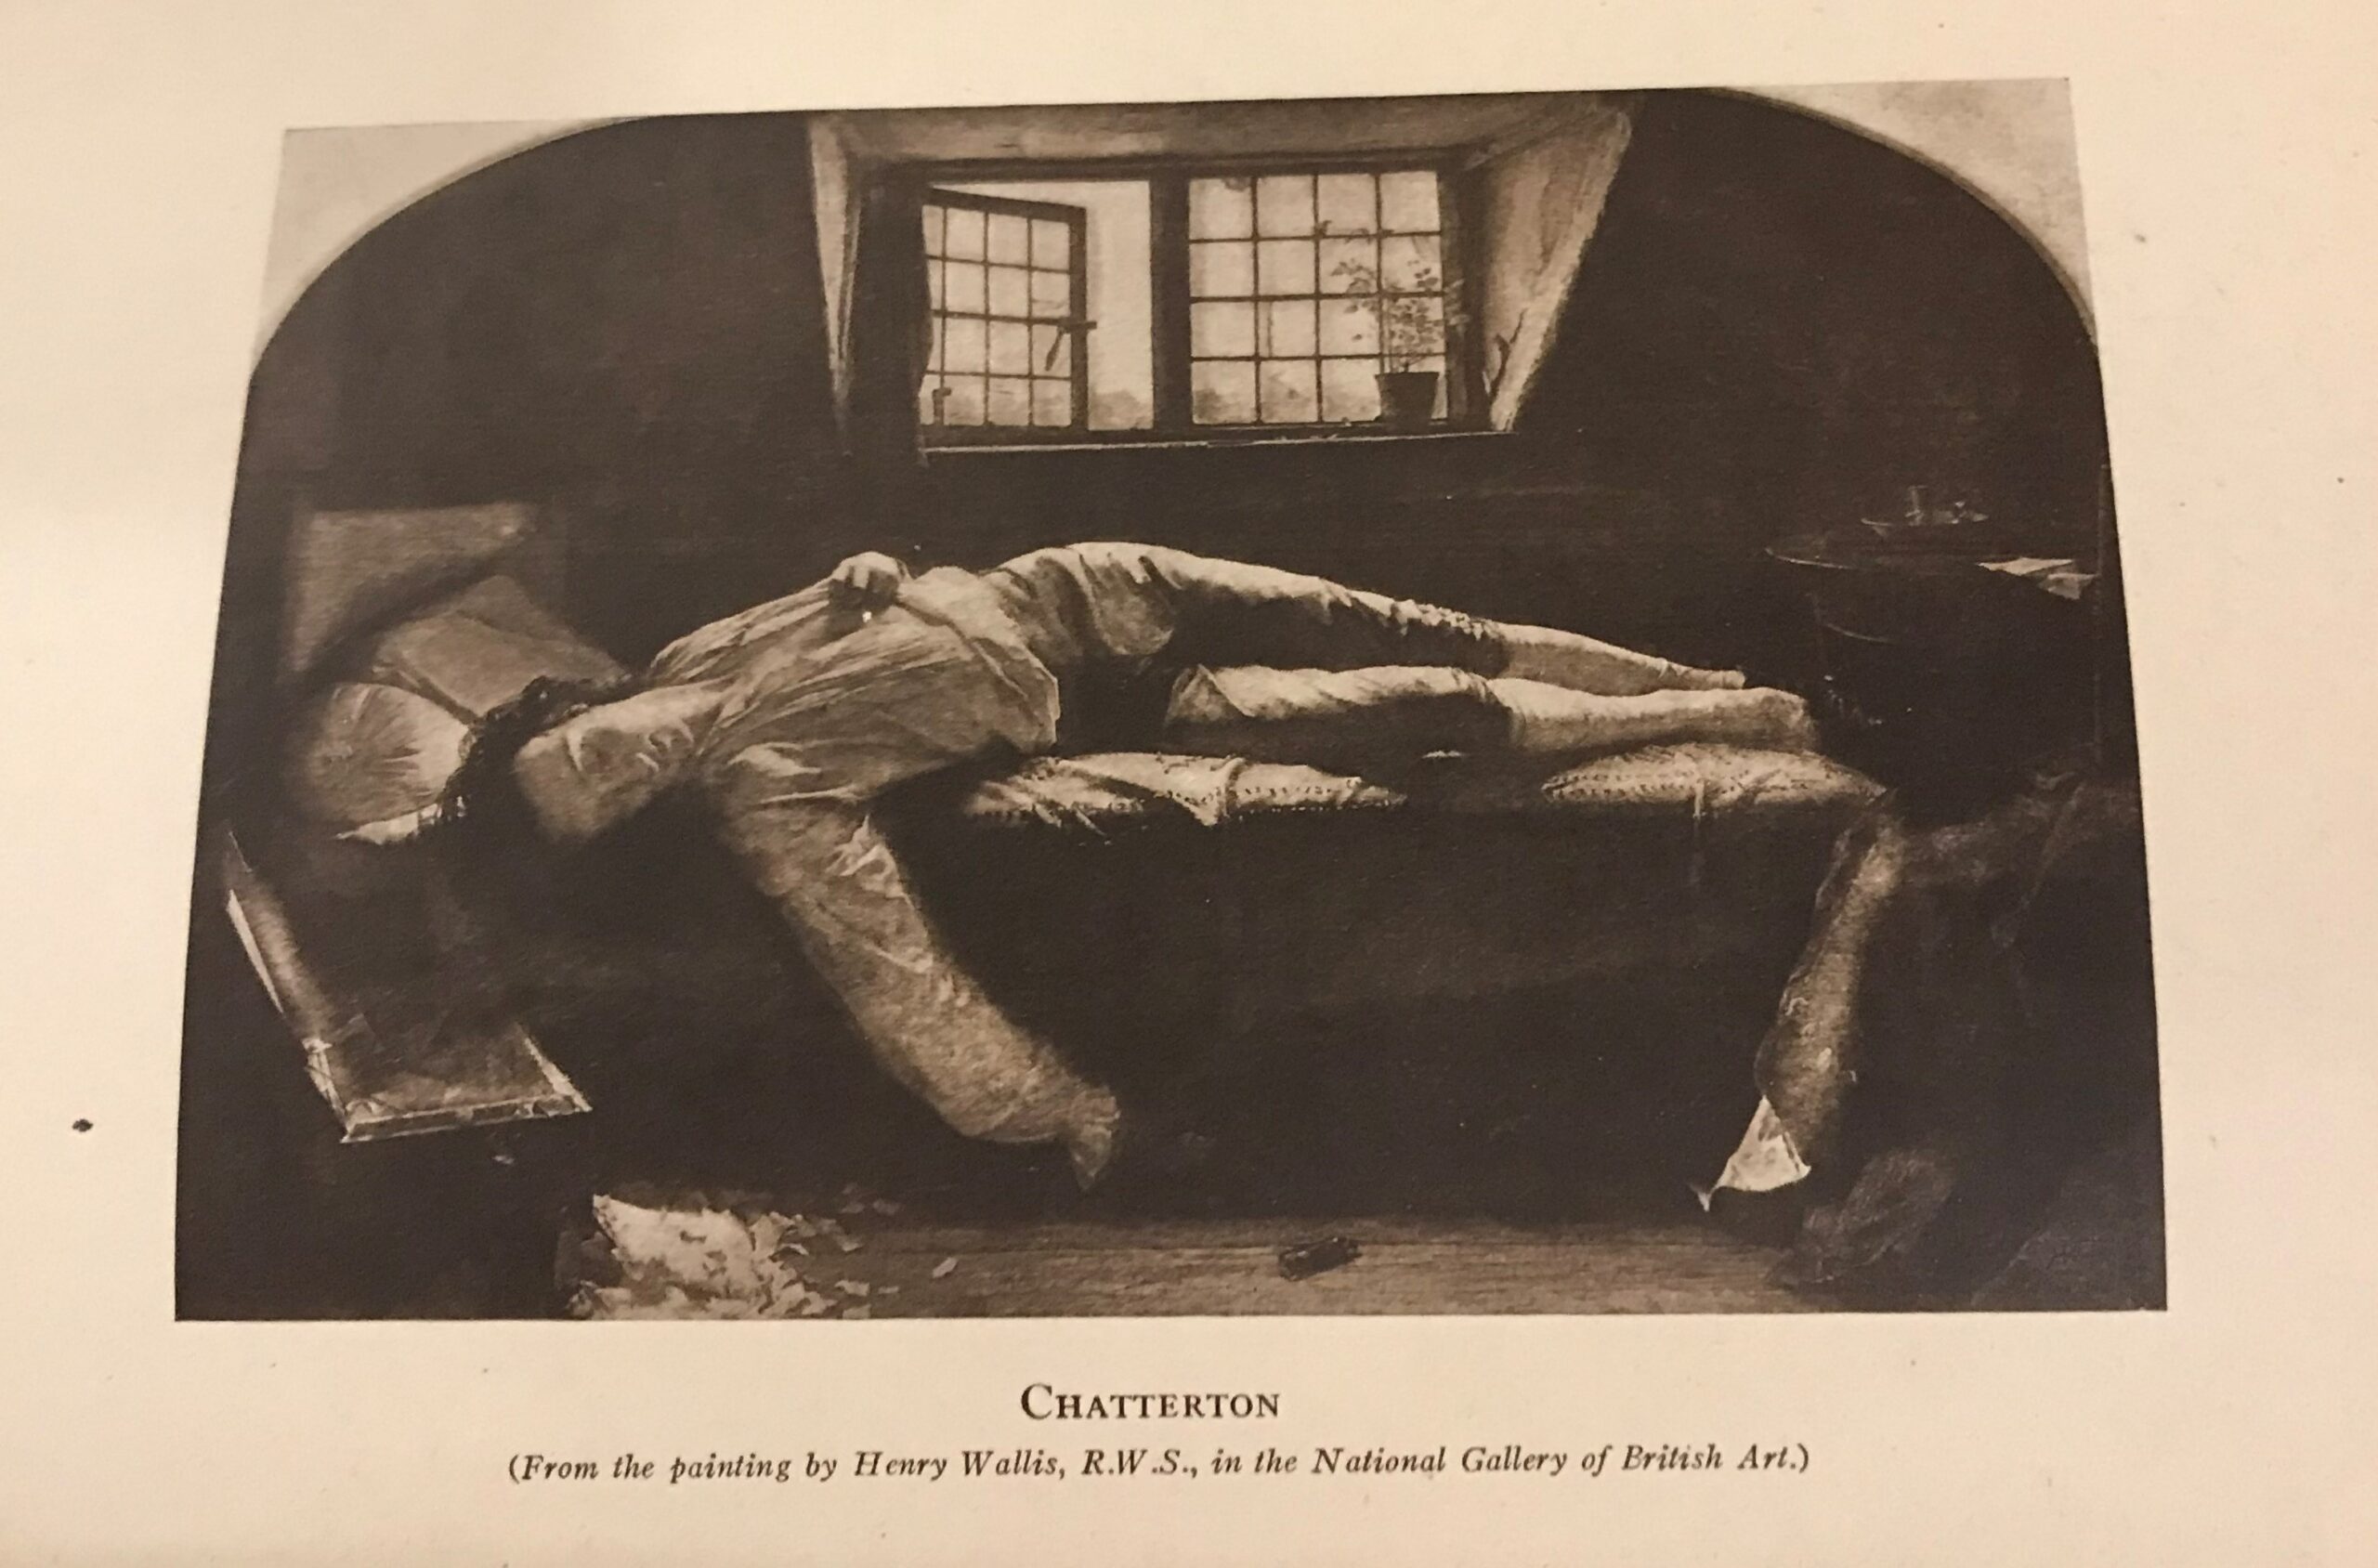 Thomas Chatterton: poems, essays, and short stories